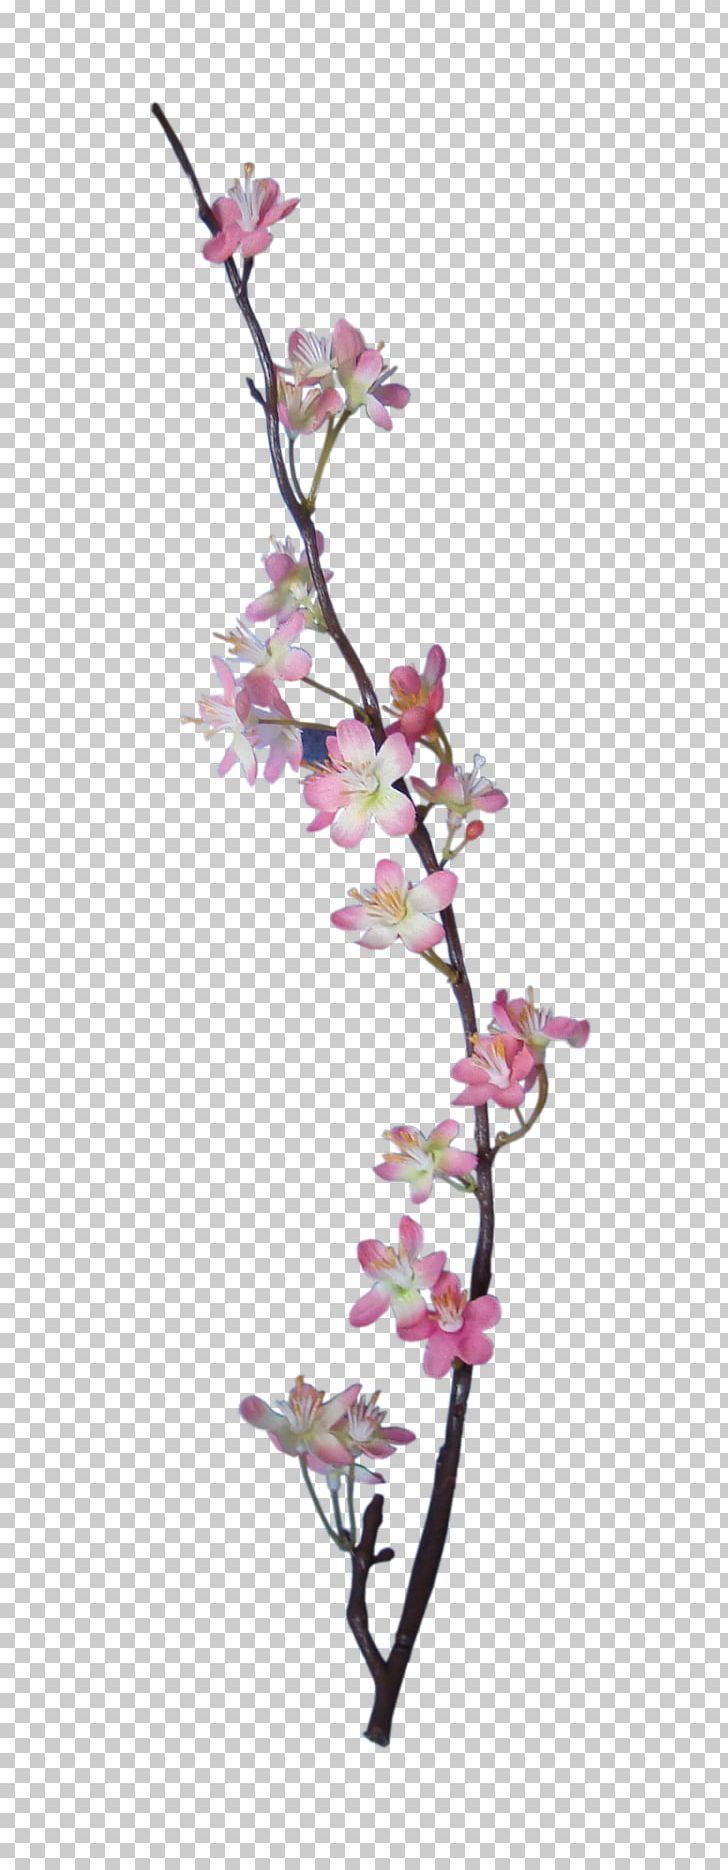 Embellishment Flower Digital Scrapbooking Apple PNG, Clipart, Apple, Apple Blossom, Blossom, Branch, Cherry Blossom Free PNG Download